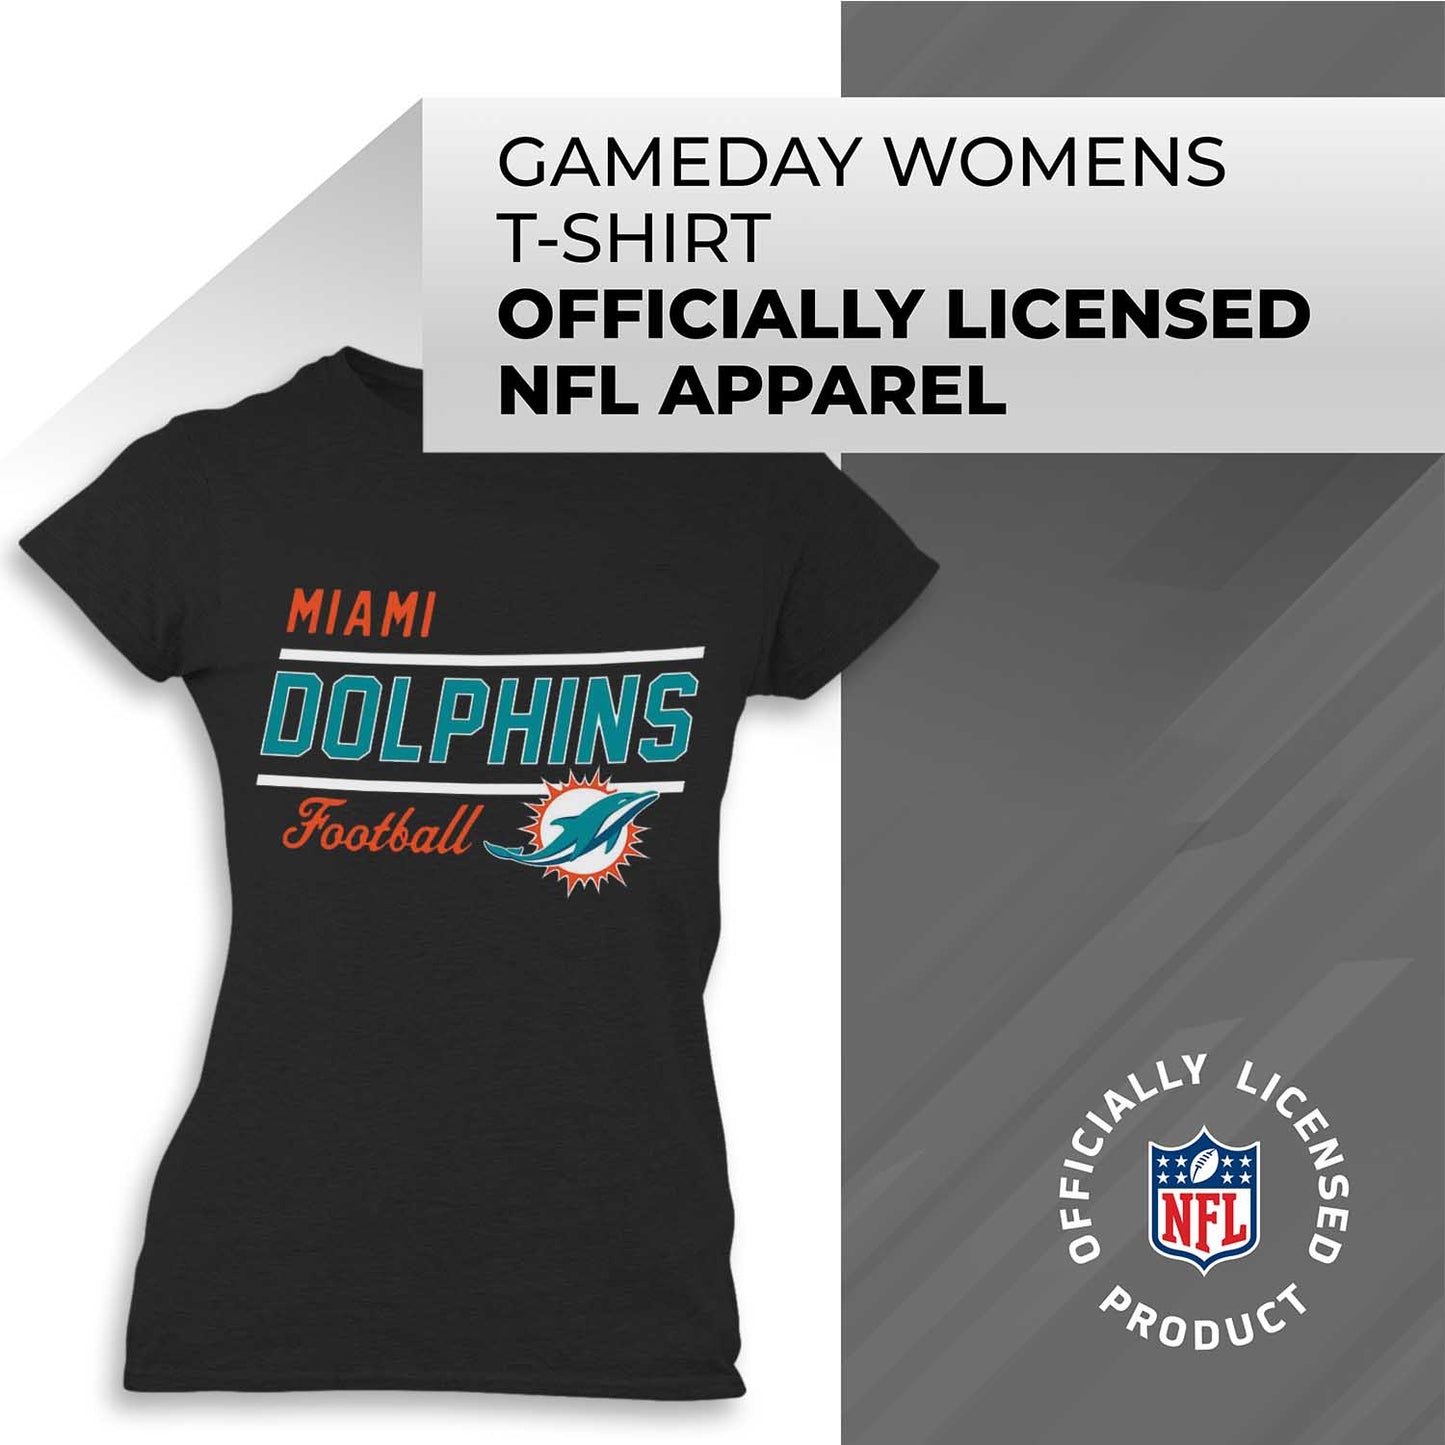 Miami Dolphins NFL Gameday Women's Relaxed Fit T-shirt - Black